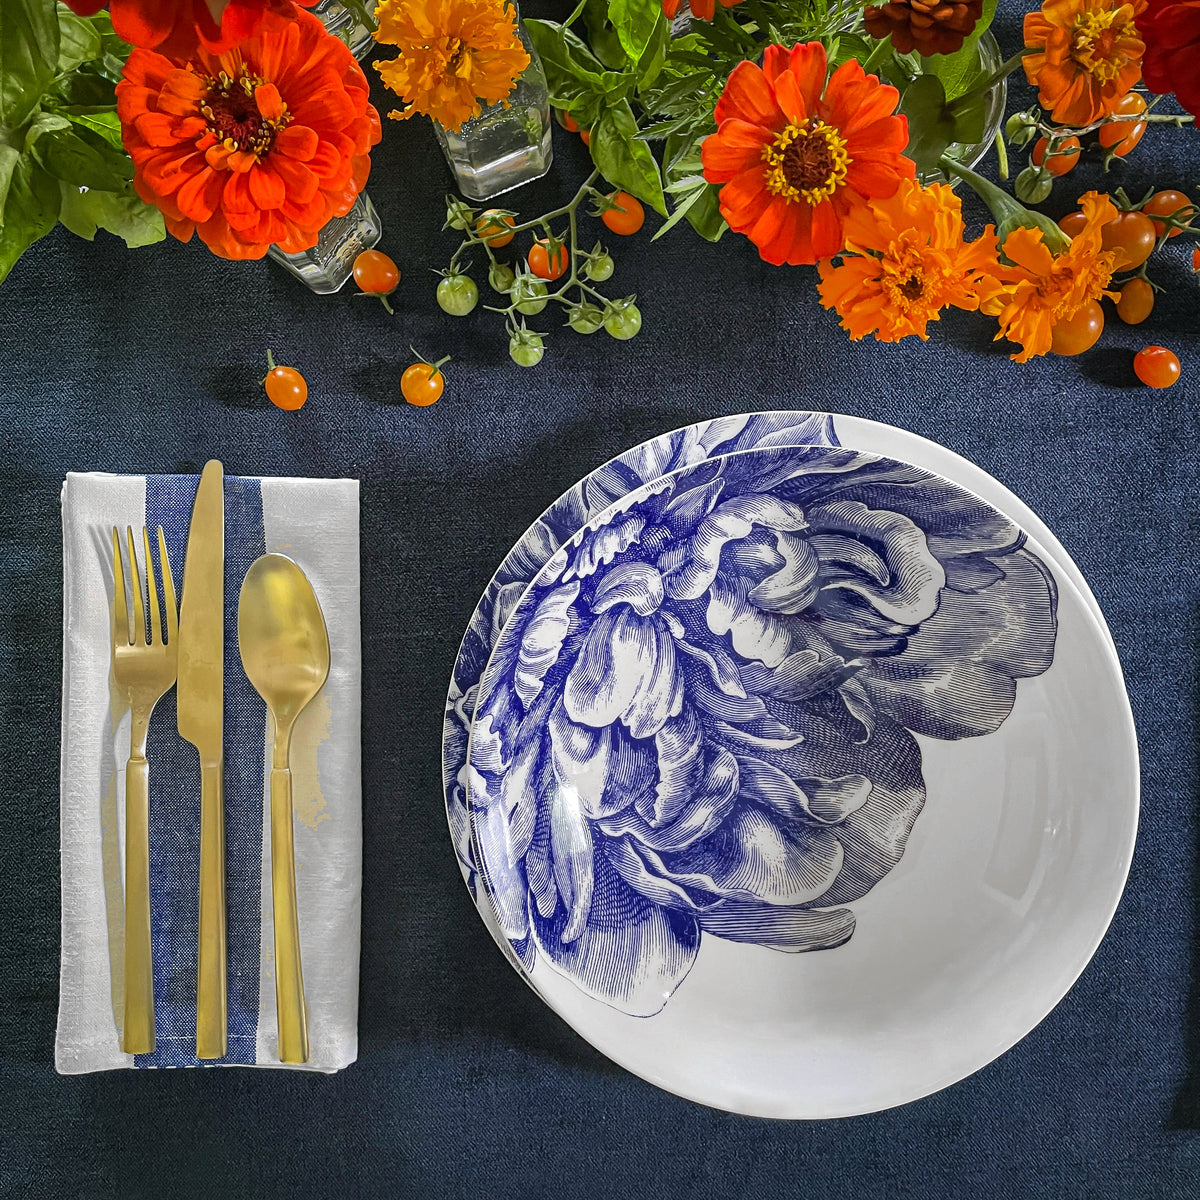 A contemporary Peony Blue Coupe Soup Bowl with Peony flowers on it, made of premium porcelain by Caskata Artisanal Home.